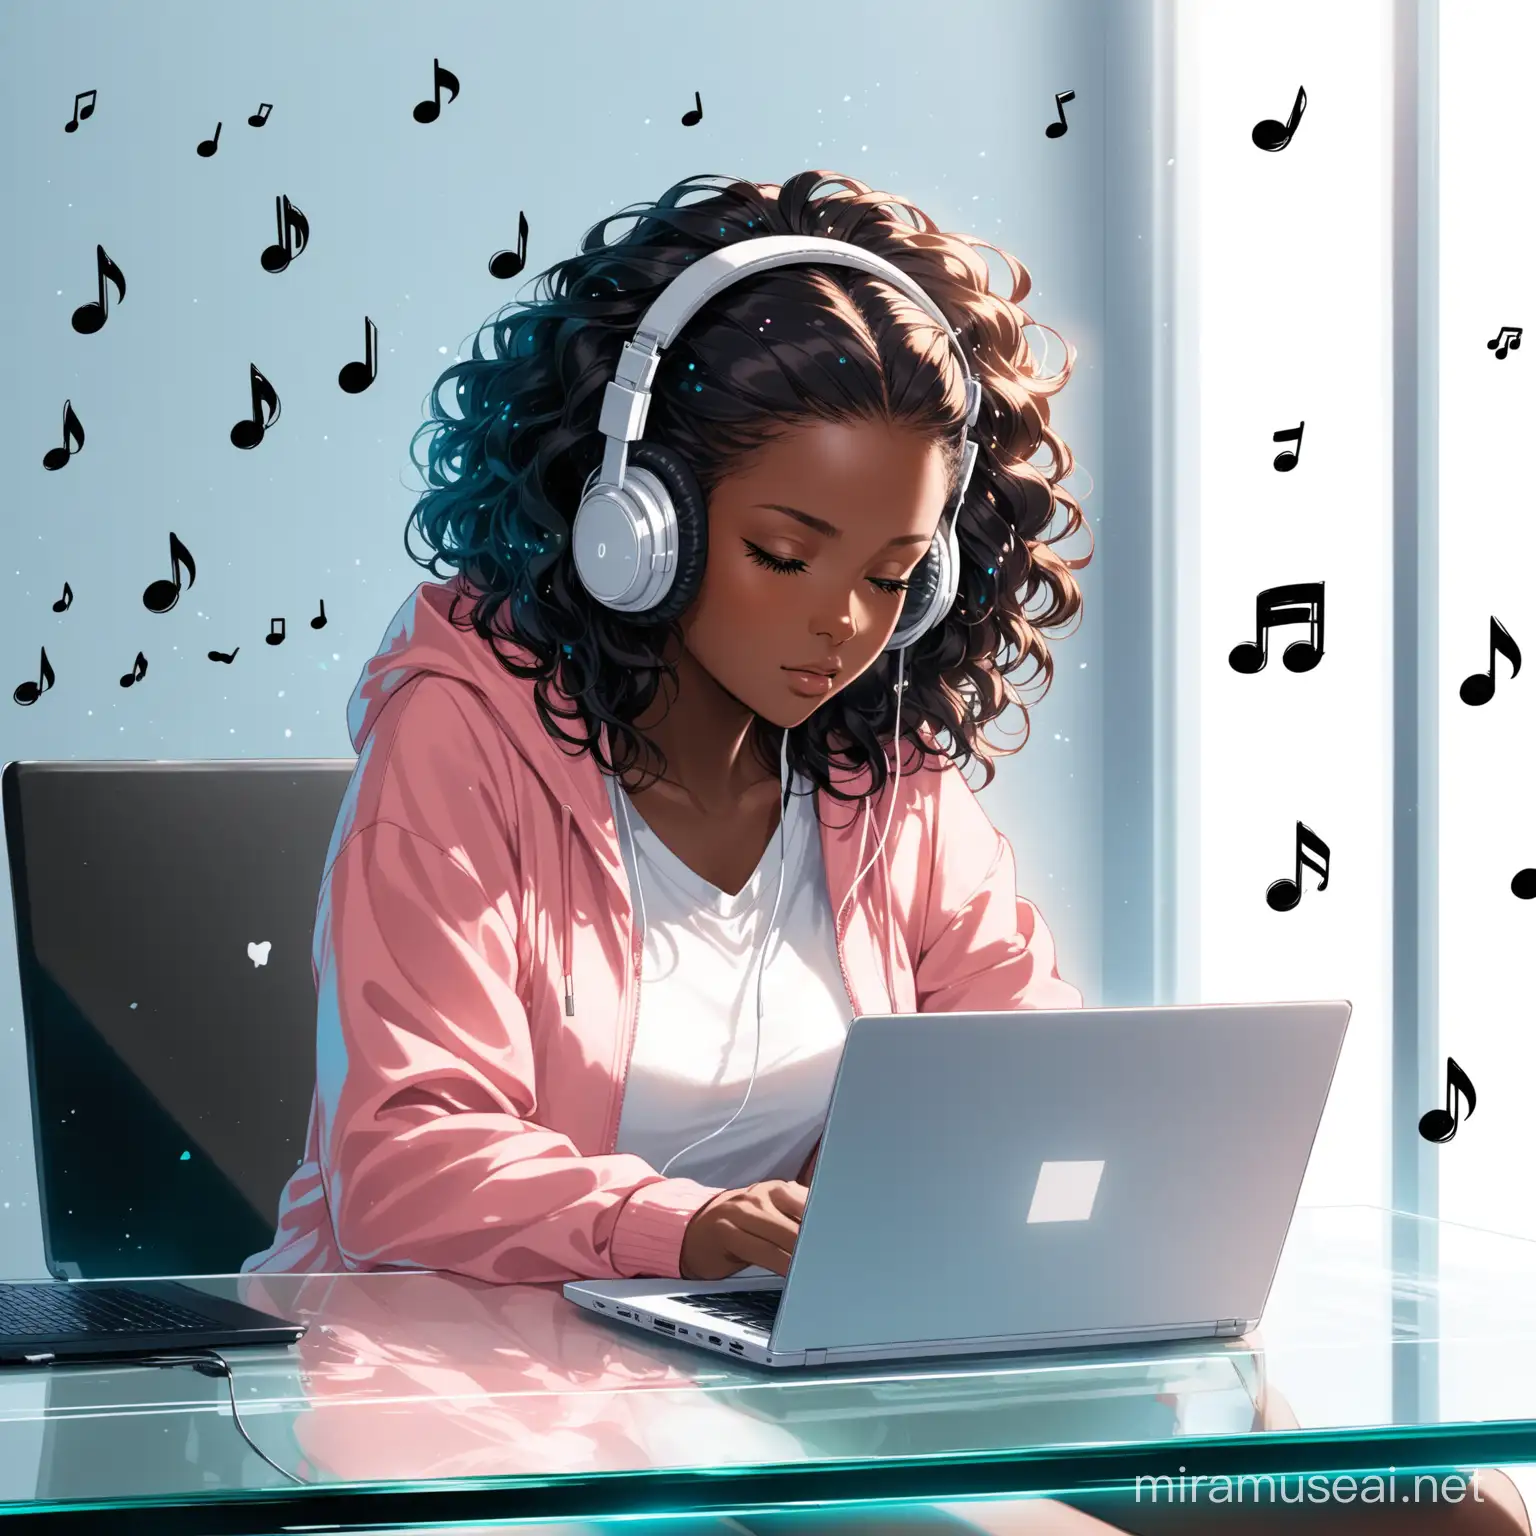 Black Woman with Semi Puffy Hair Working on Unbranded Laptop with Music Notes